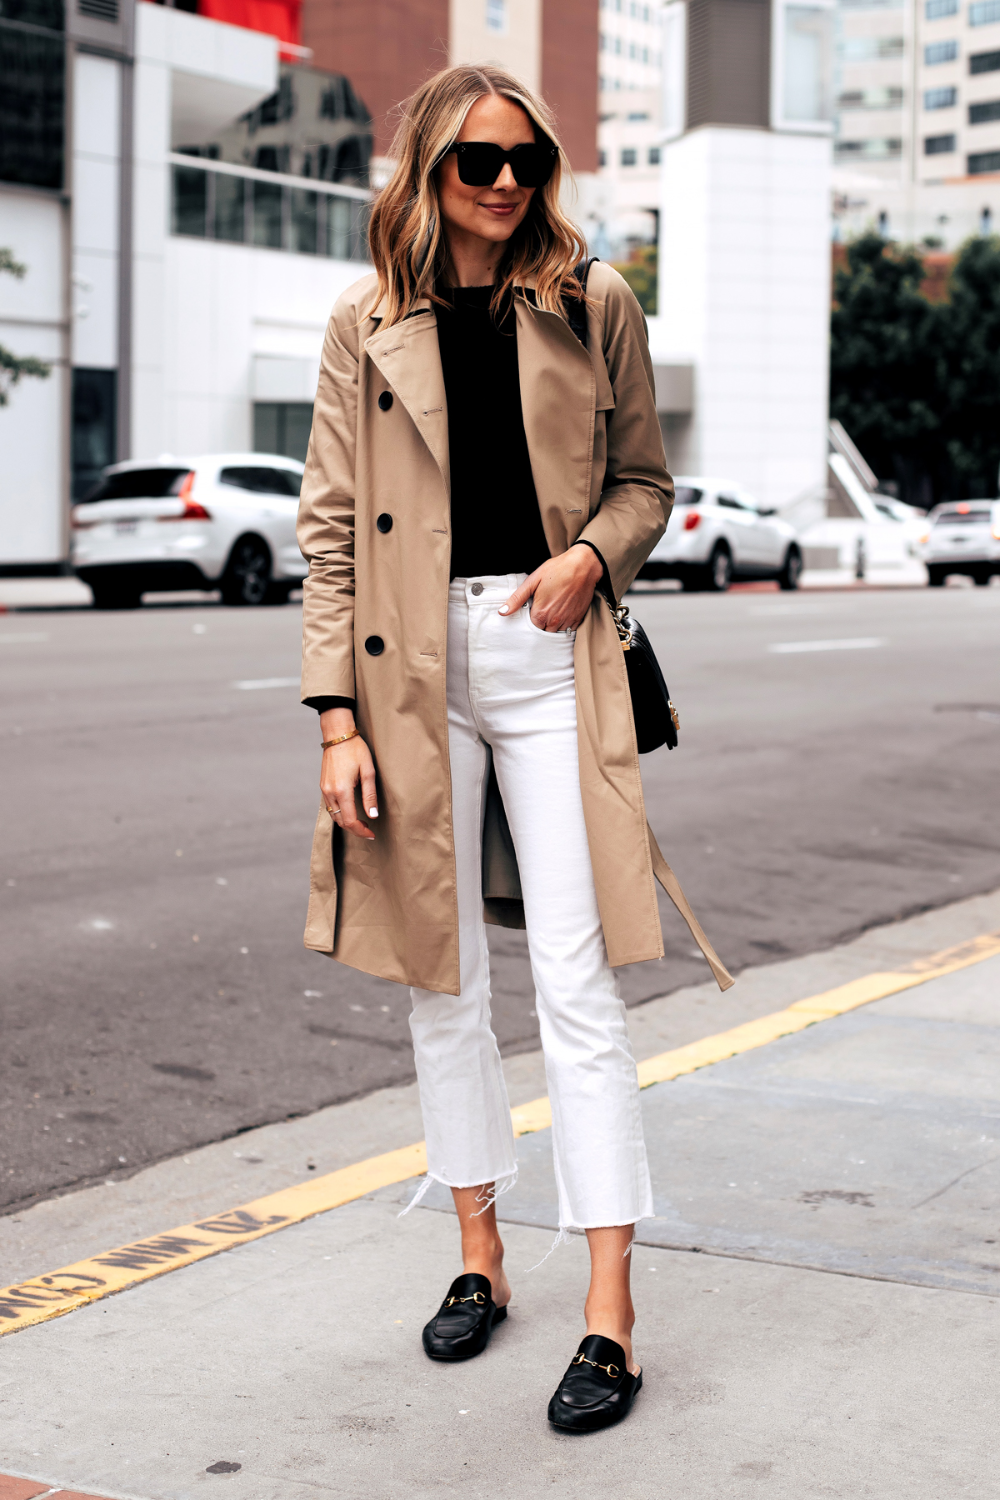 Trend Alert: The Best Ways to Style White
Cropped Jeans